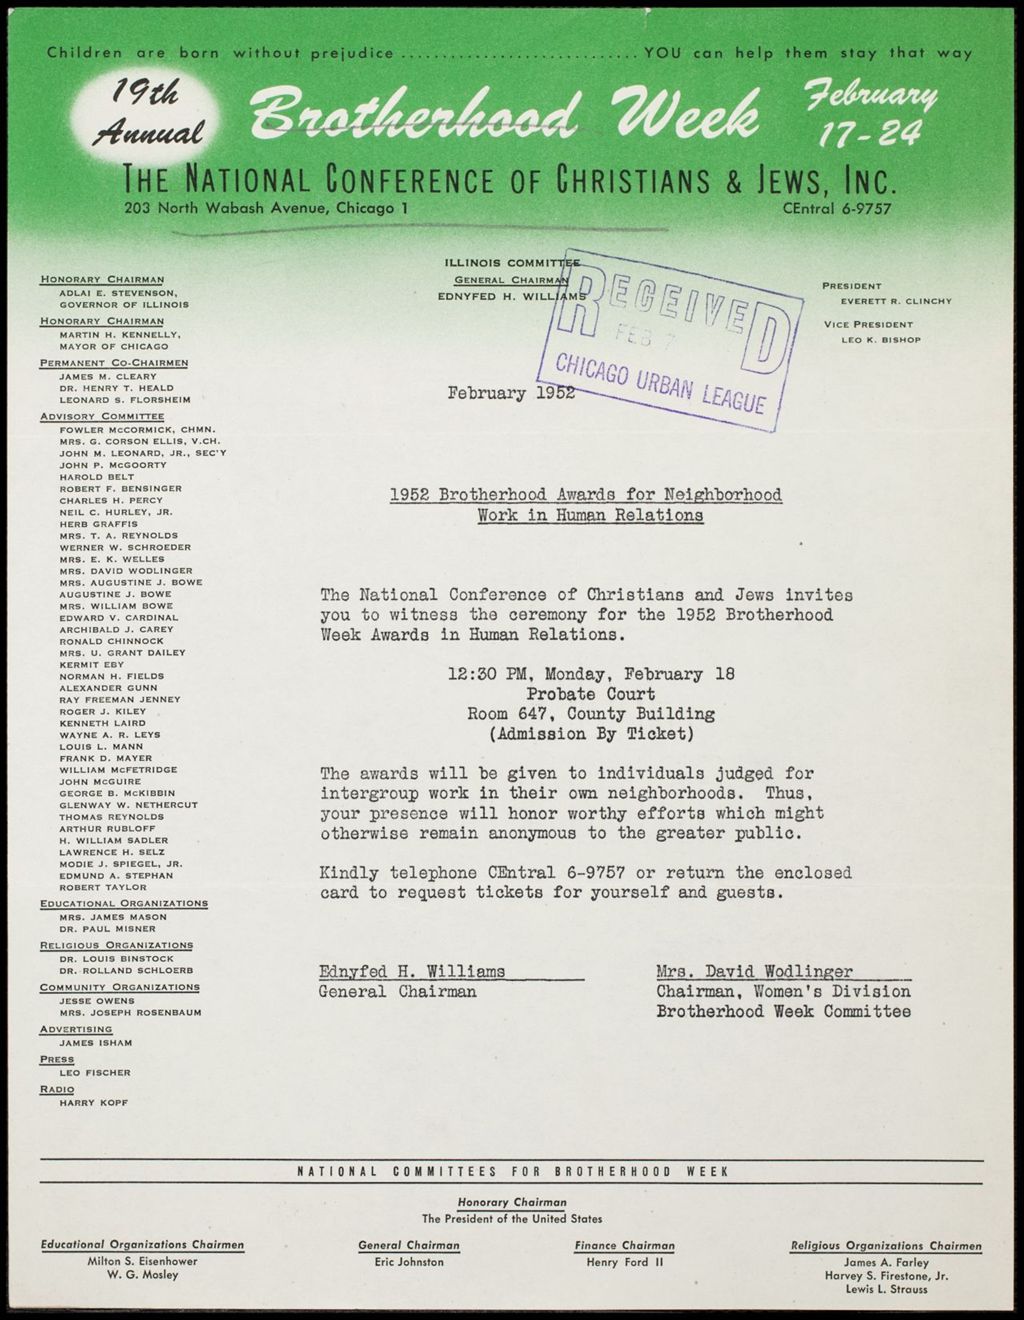 Miniature of National Conference of Christians and Jews, 1952-1956 (Folder I-2651)